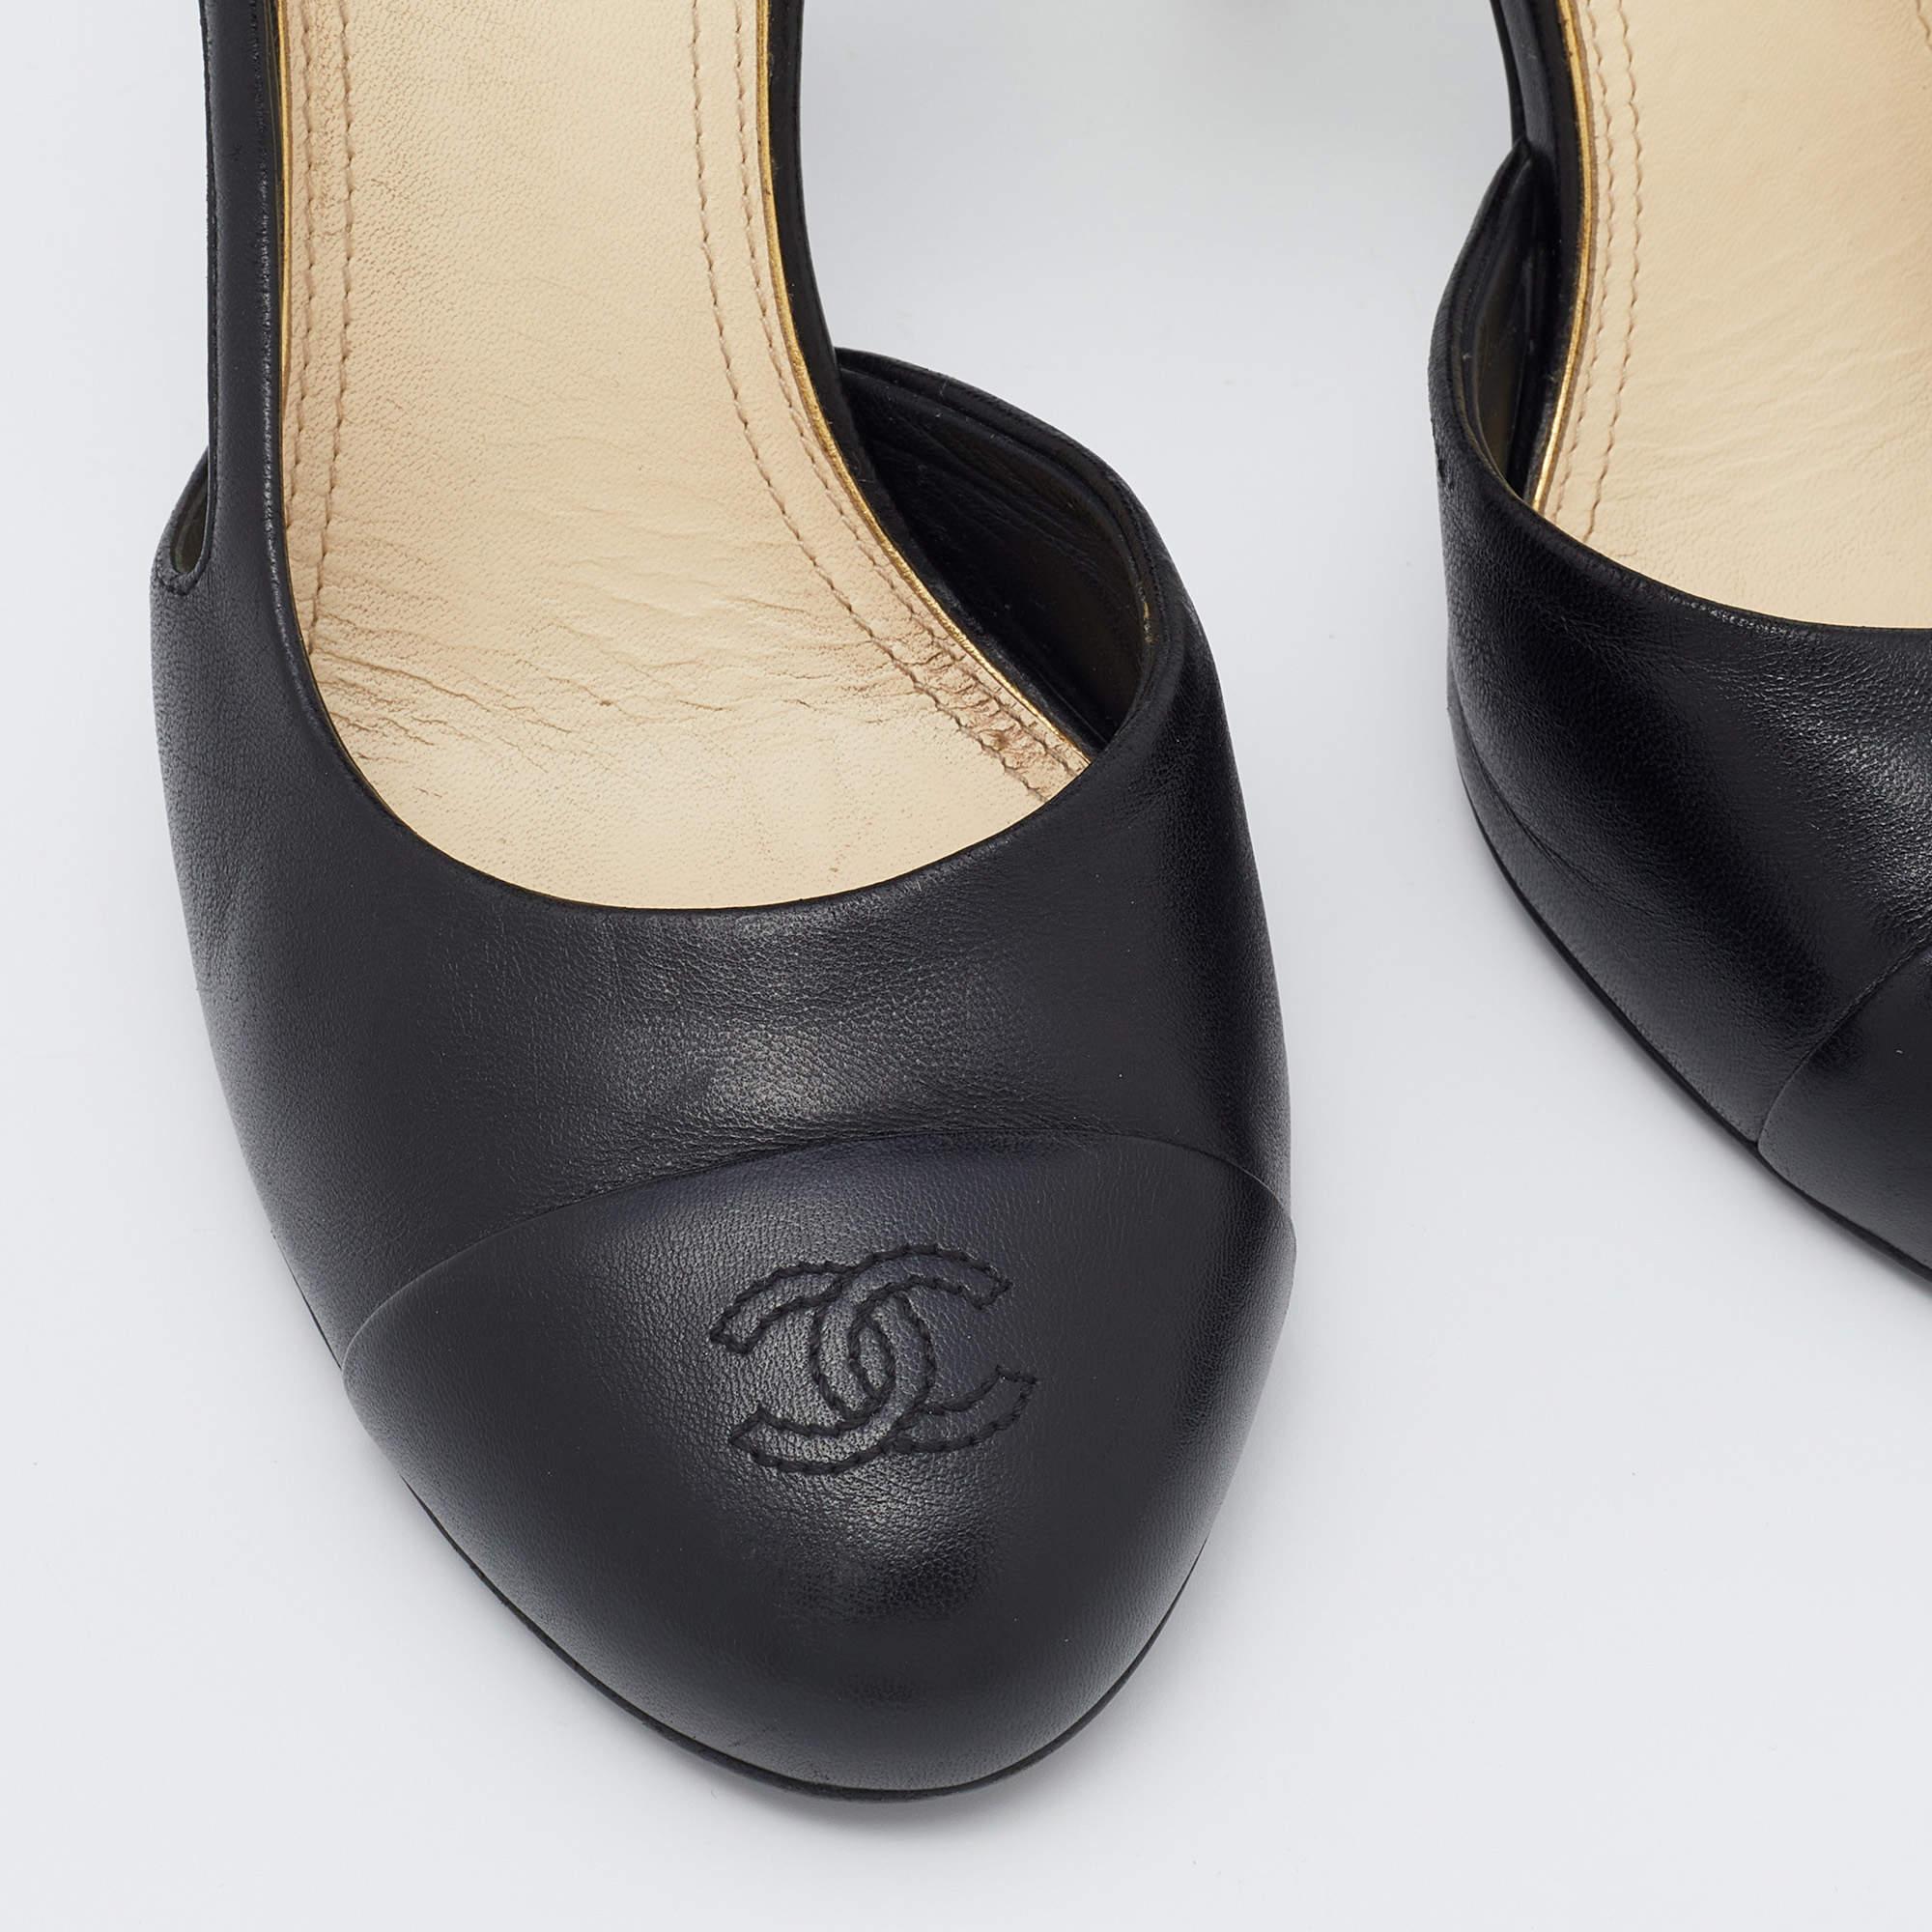 Chanel Black Leather Pearl Heel D'Orsay Pumps Size 38 2